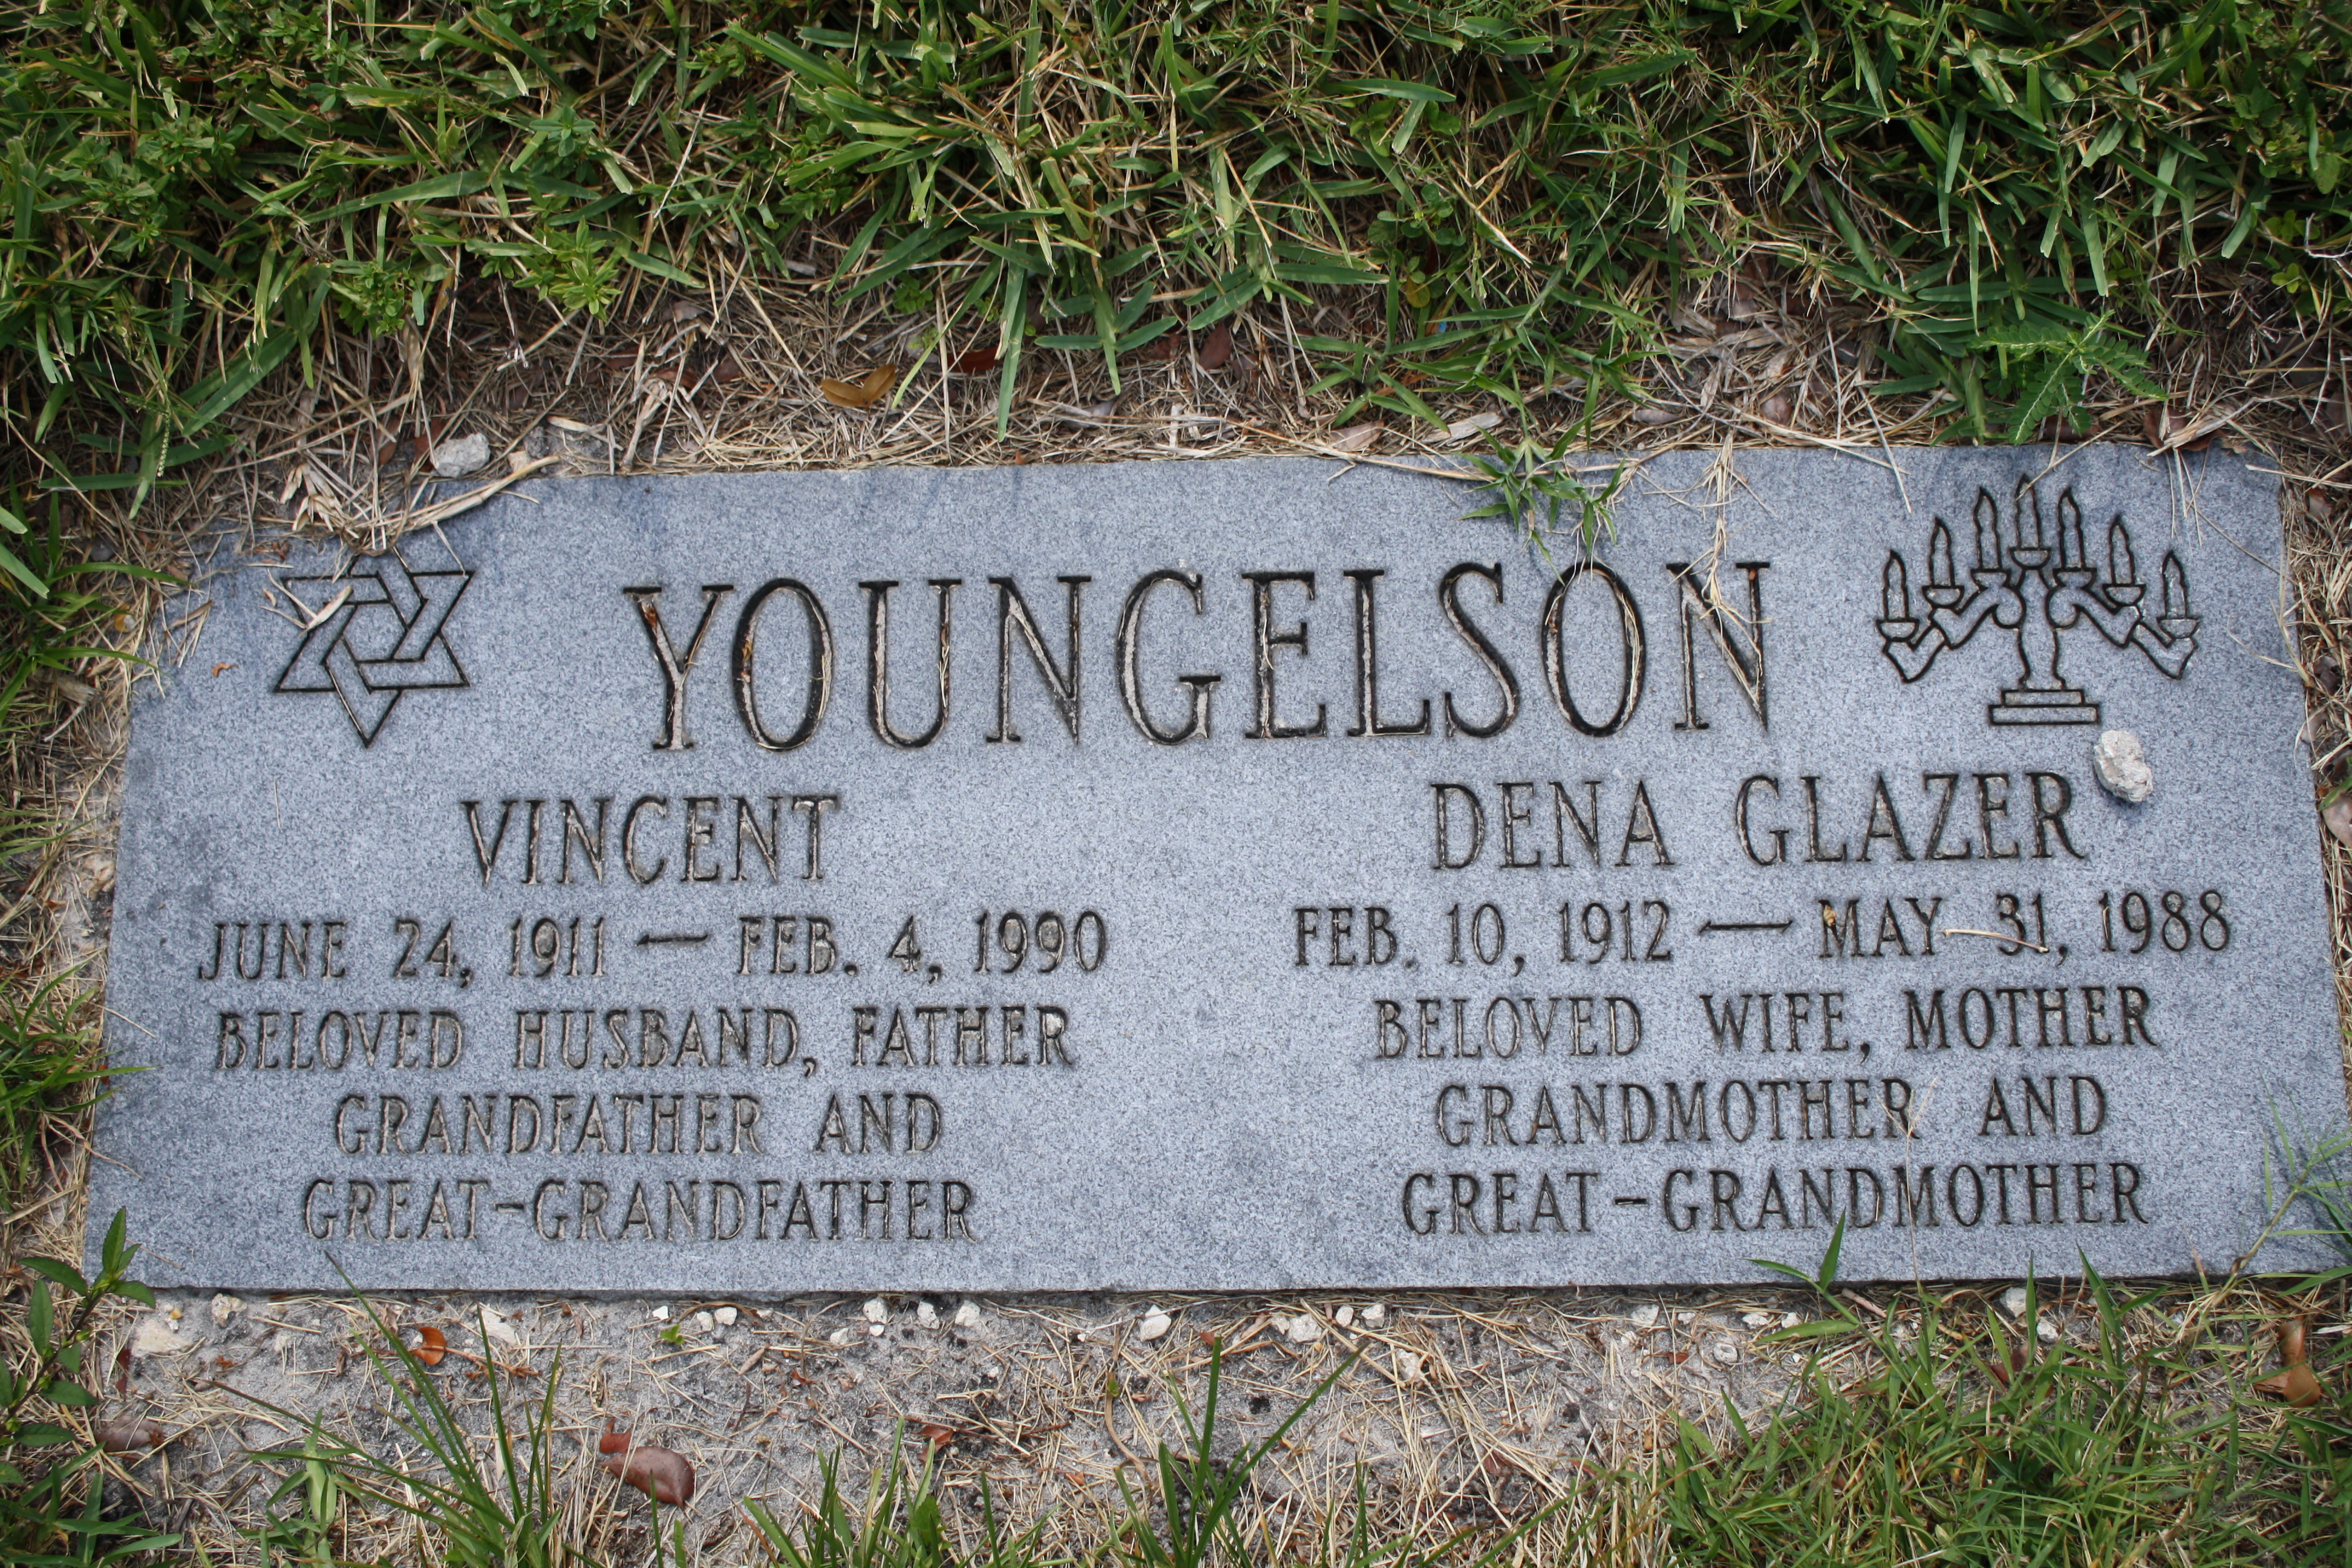 Vincent Youngelson